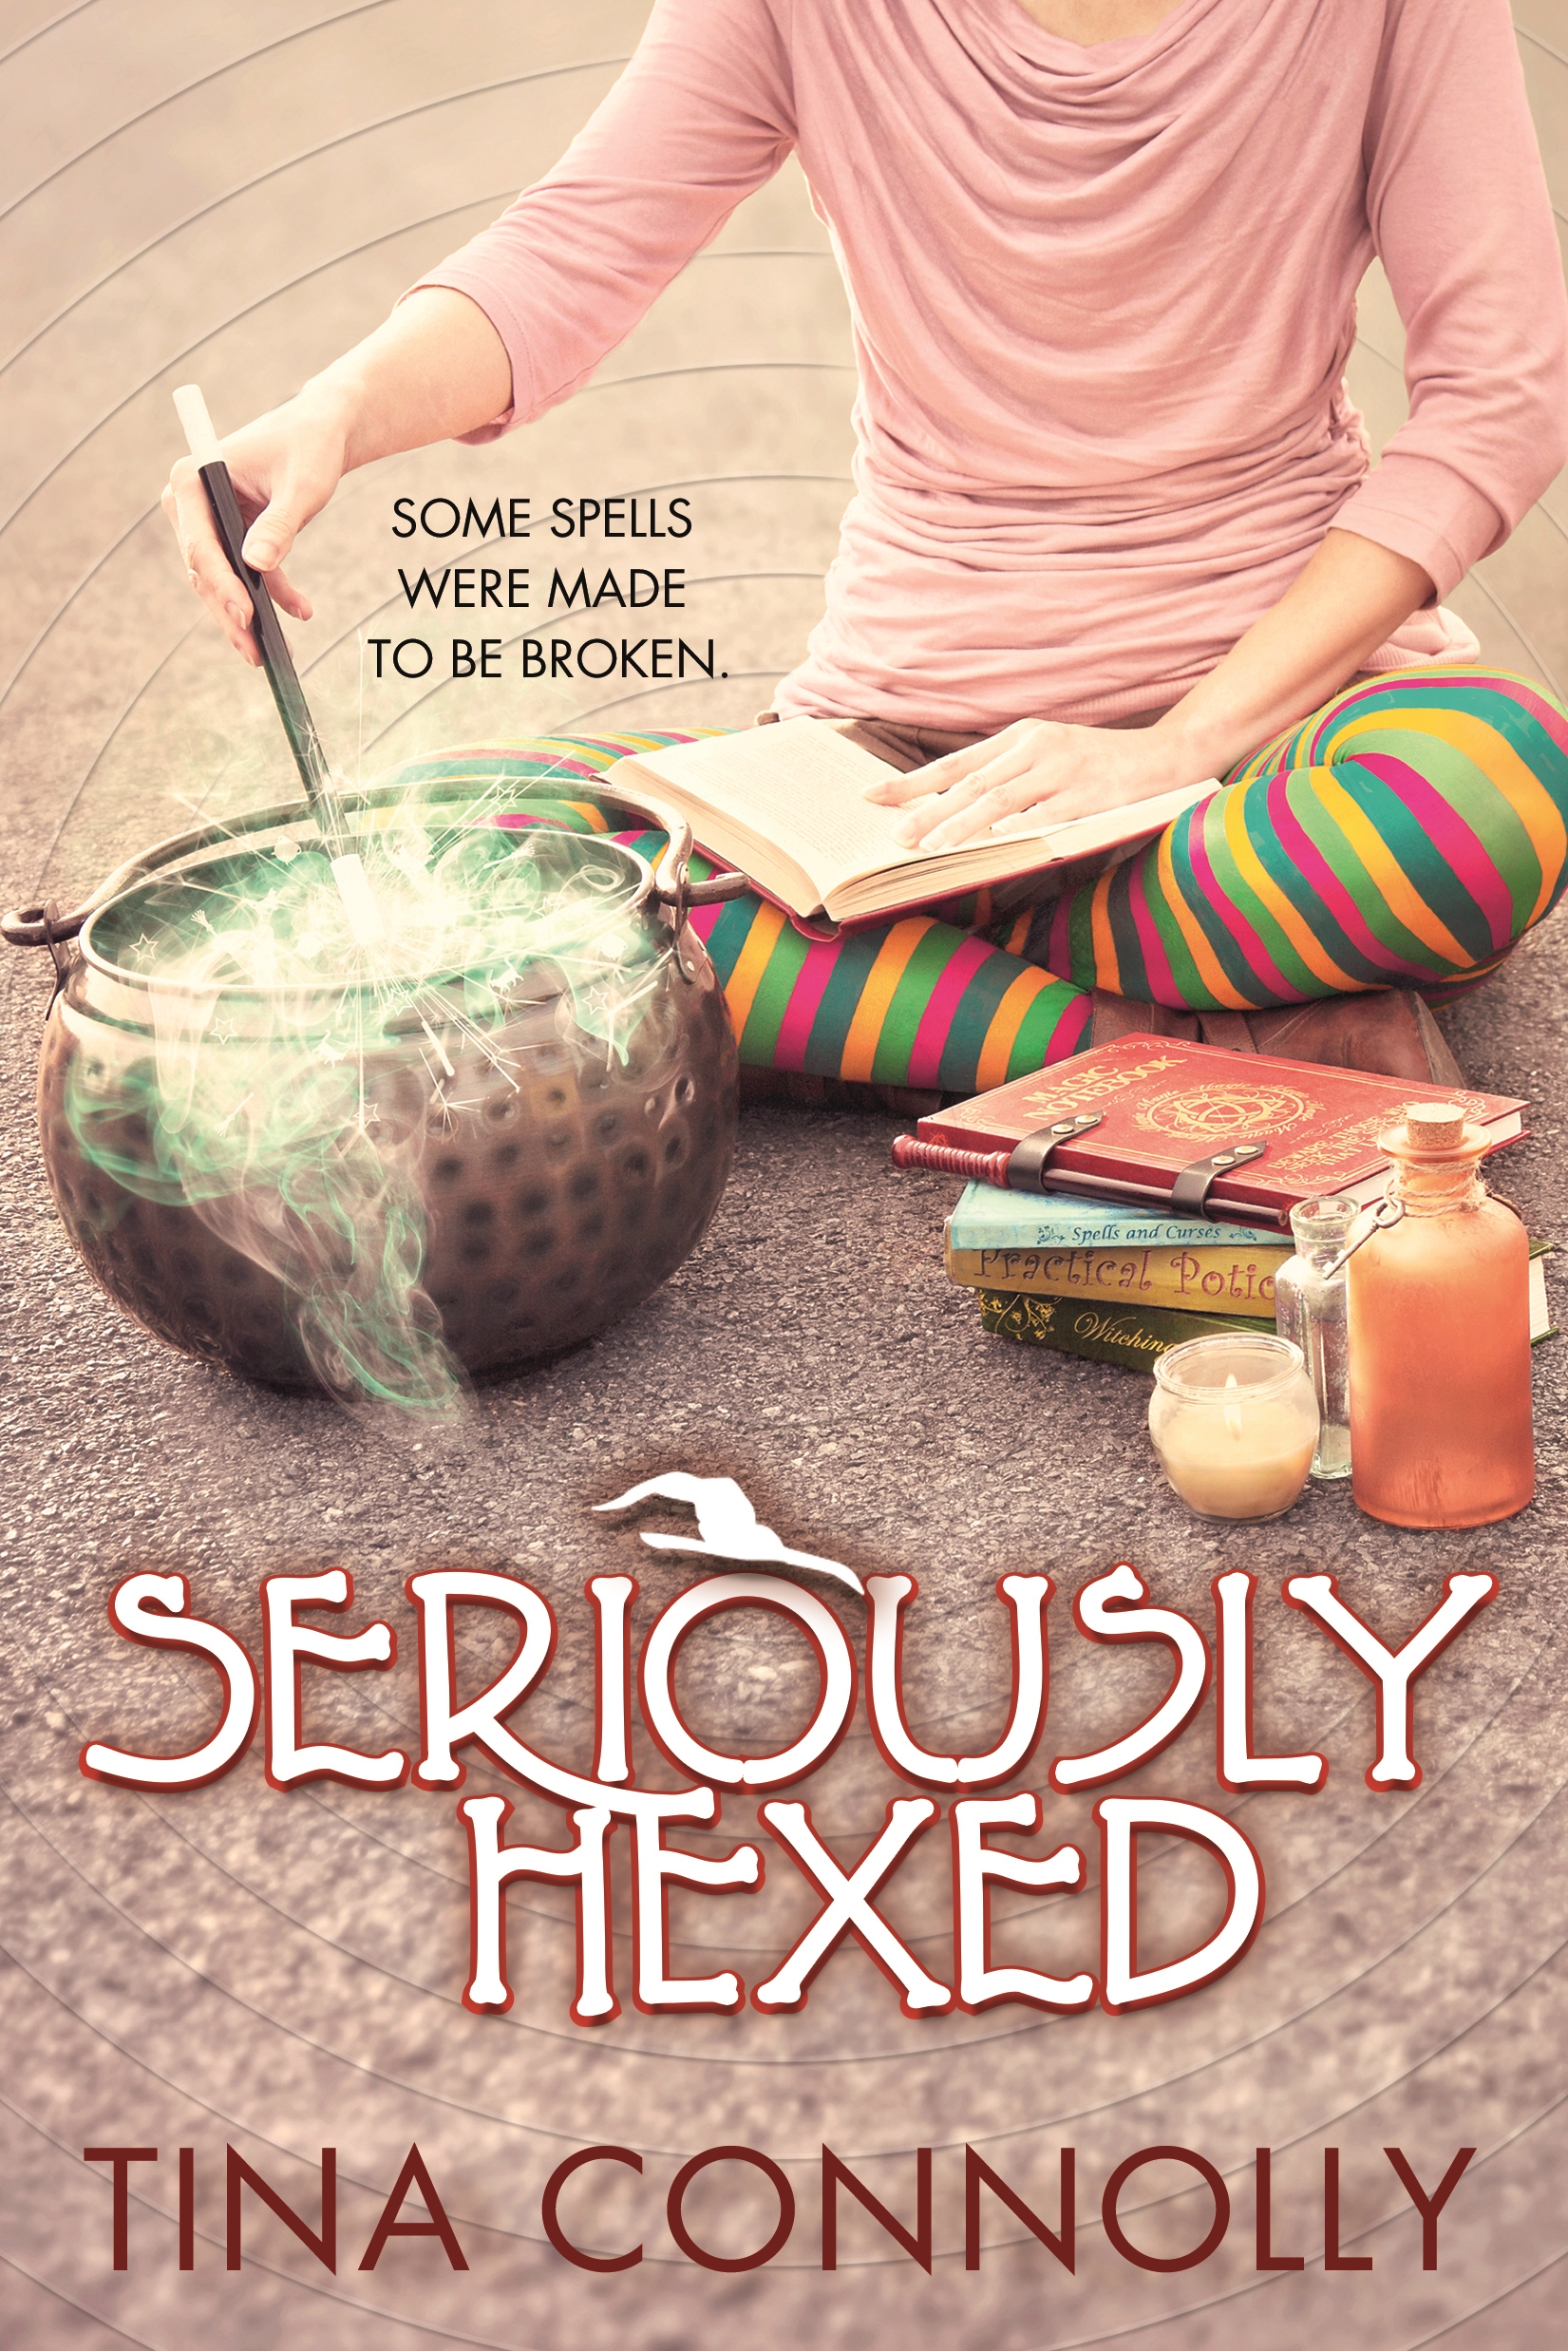 Seriously Hexed by Tina Connolly